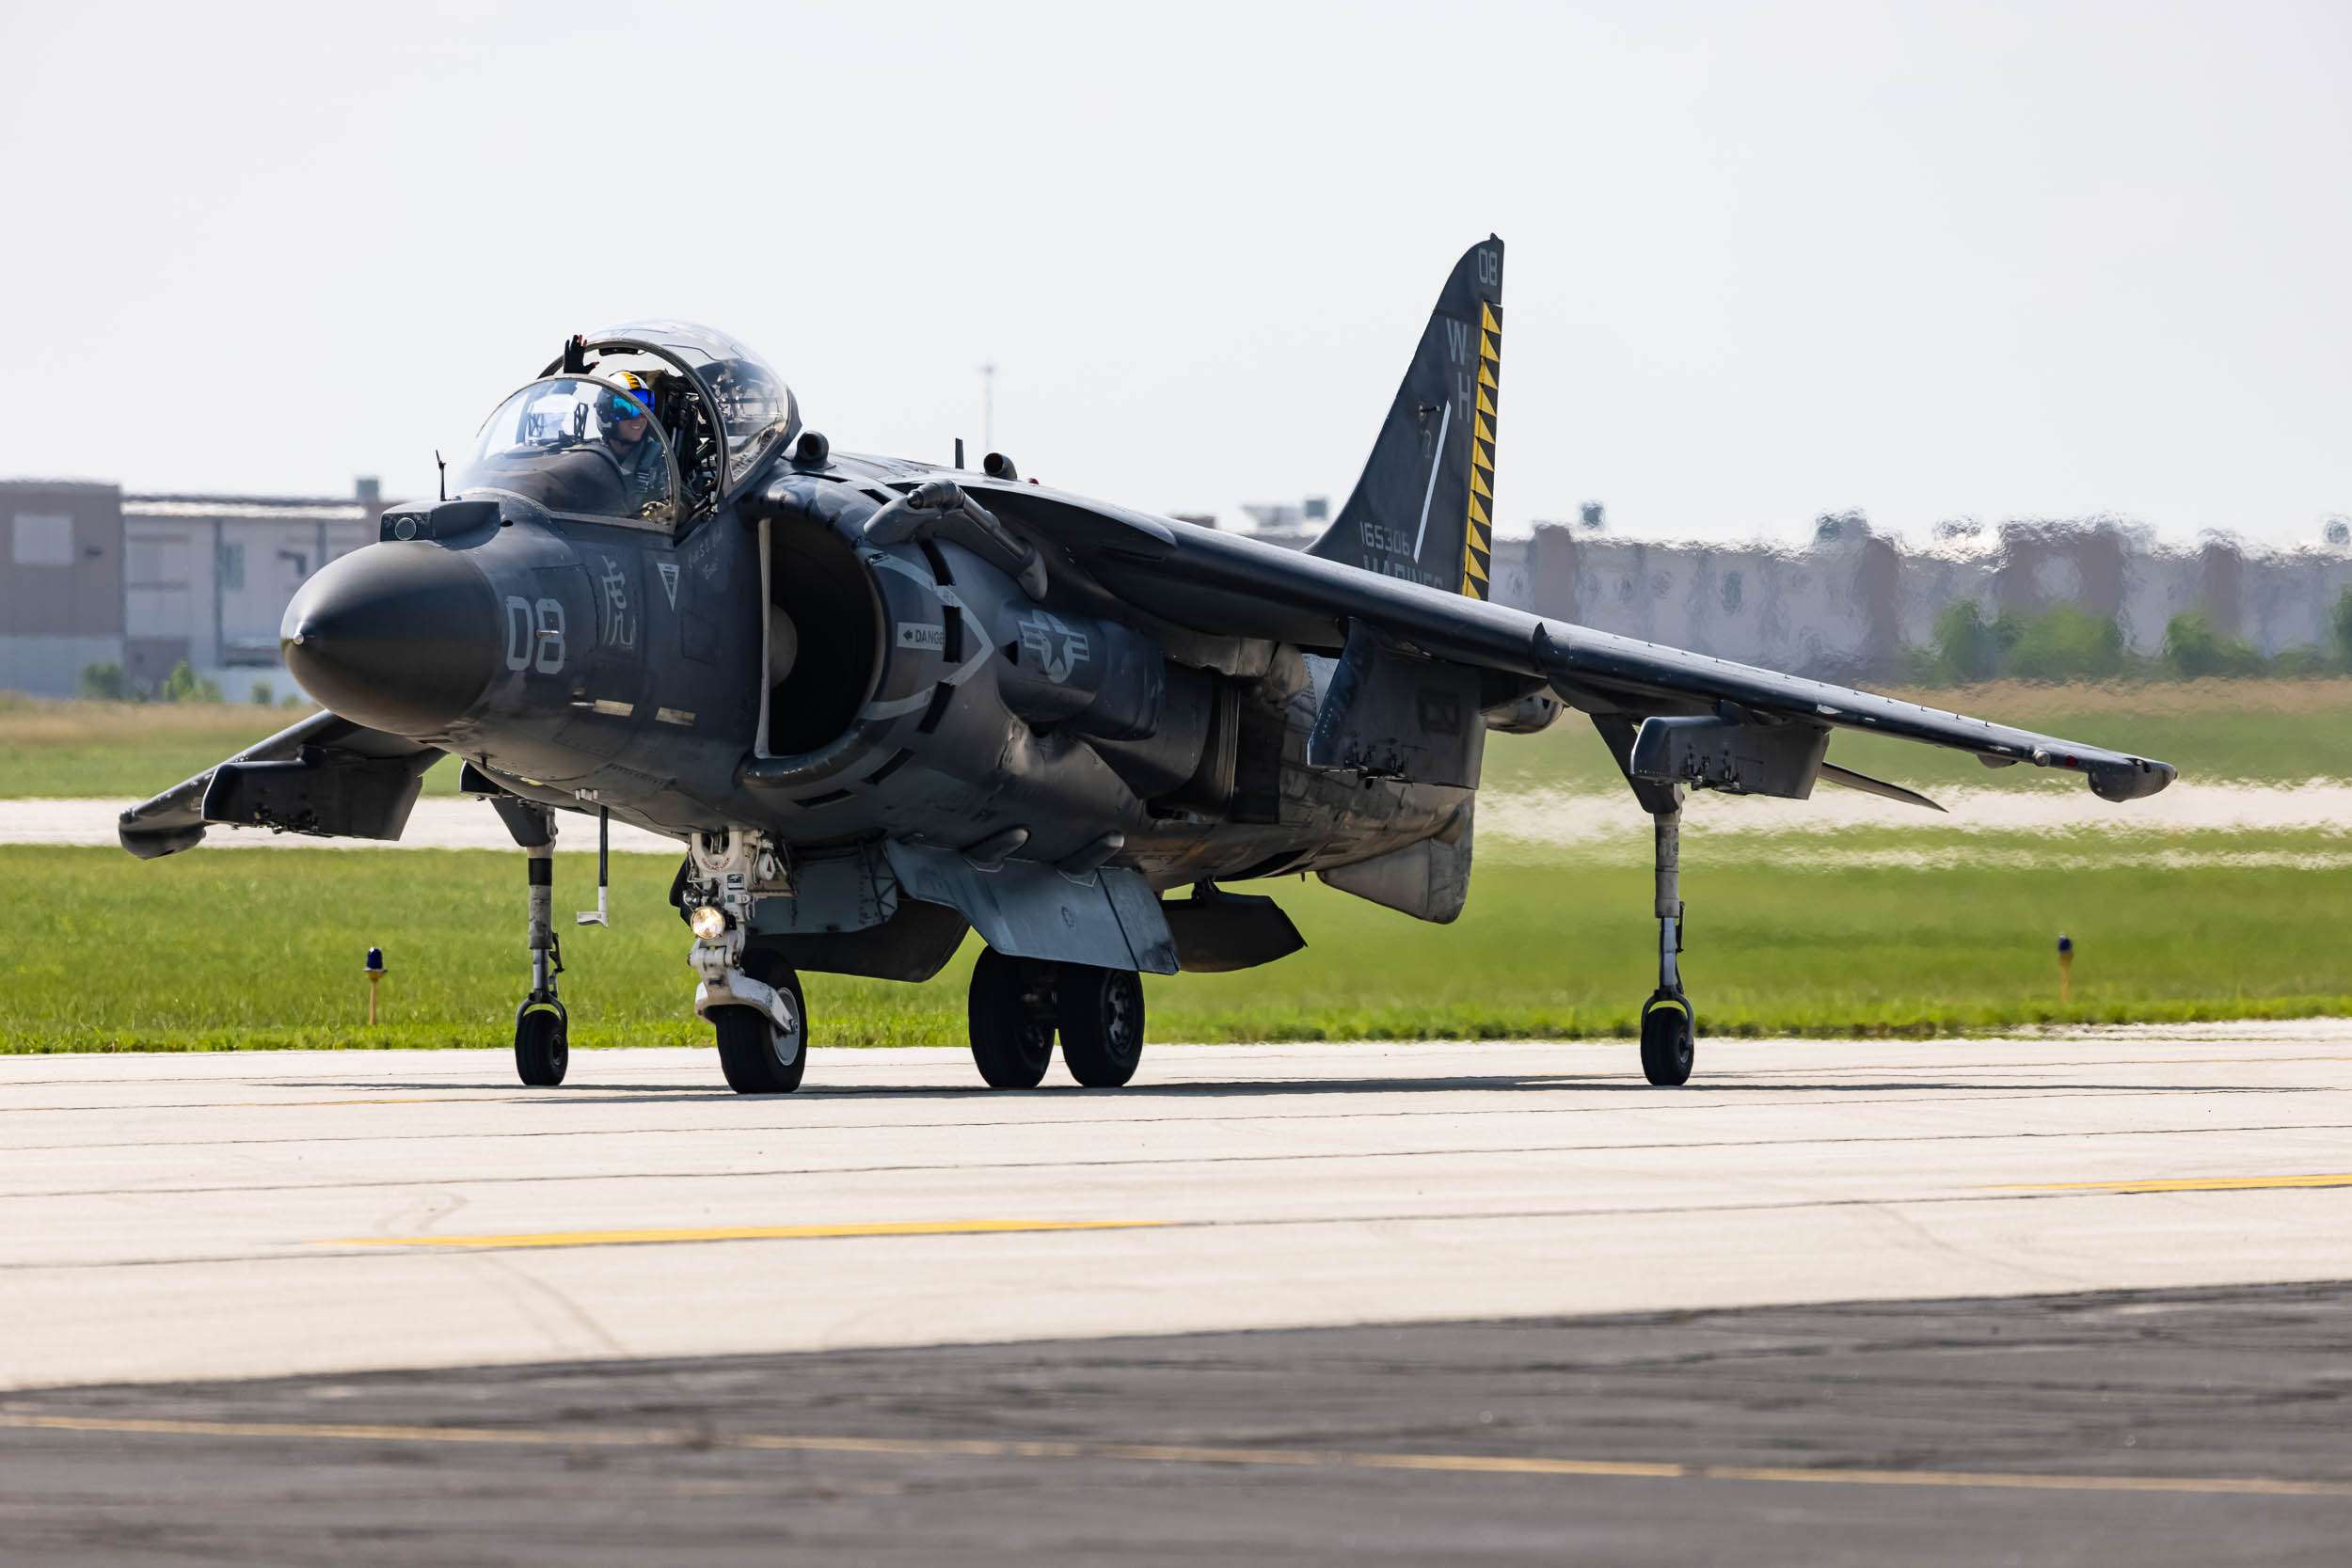 A US Marine Corps AV8-B Harrier jet taxis at an airshow